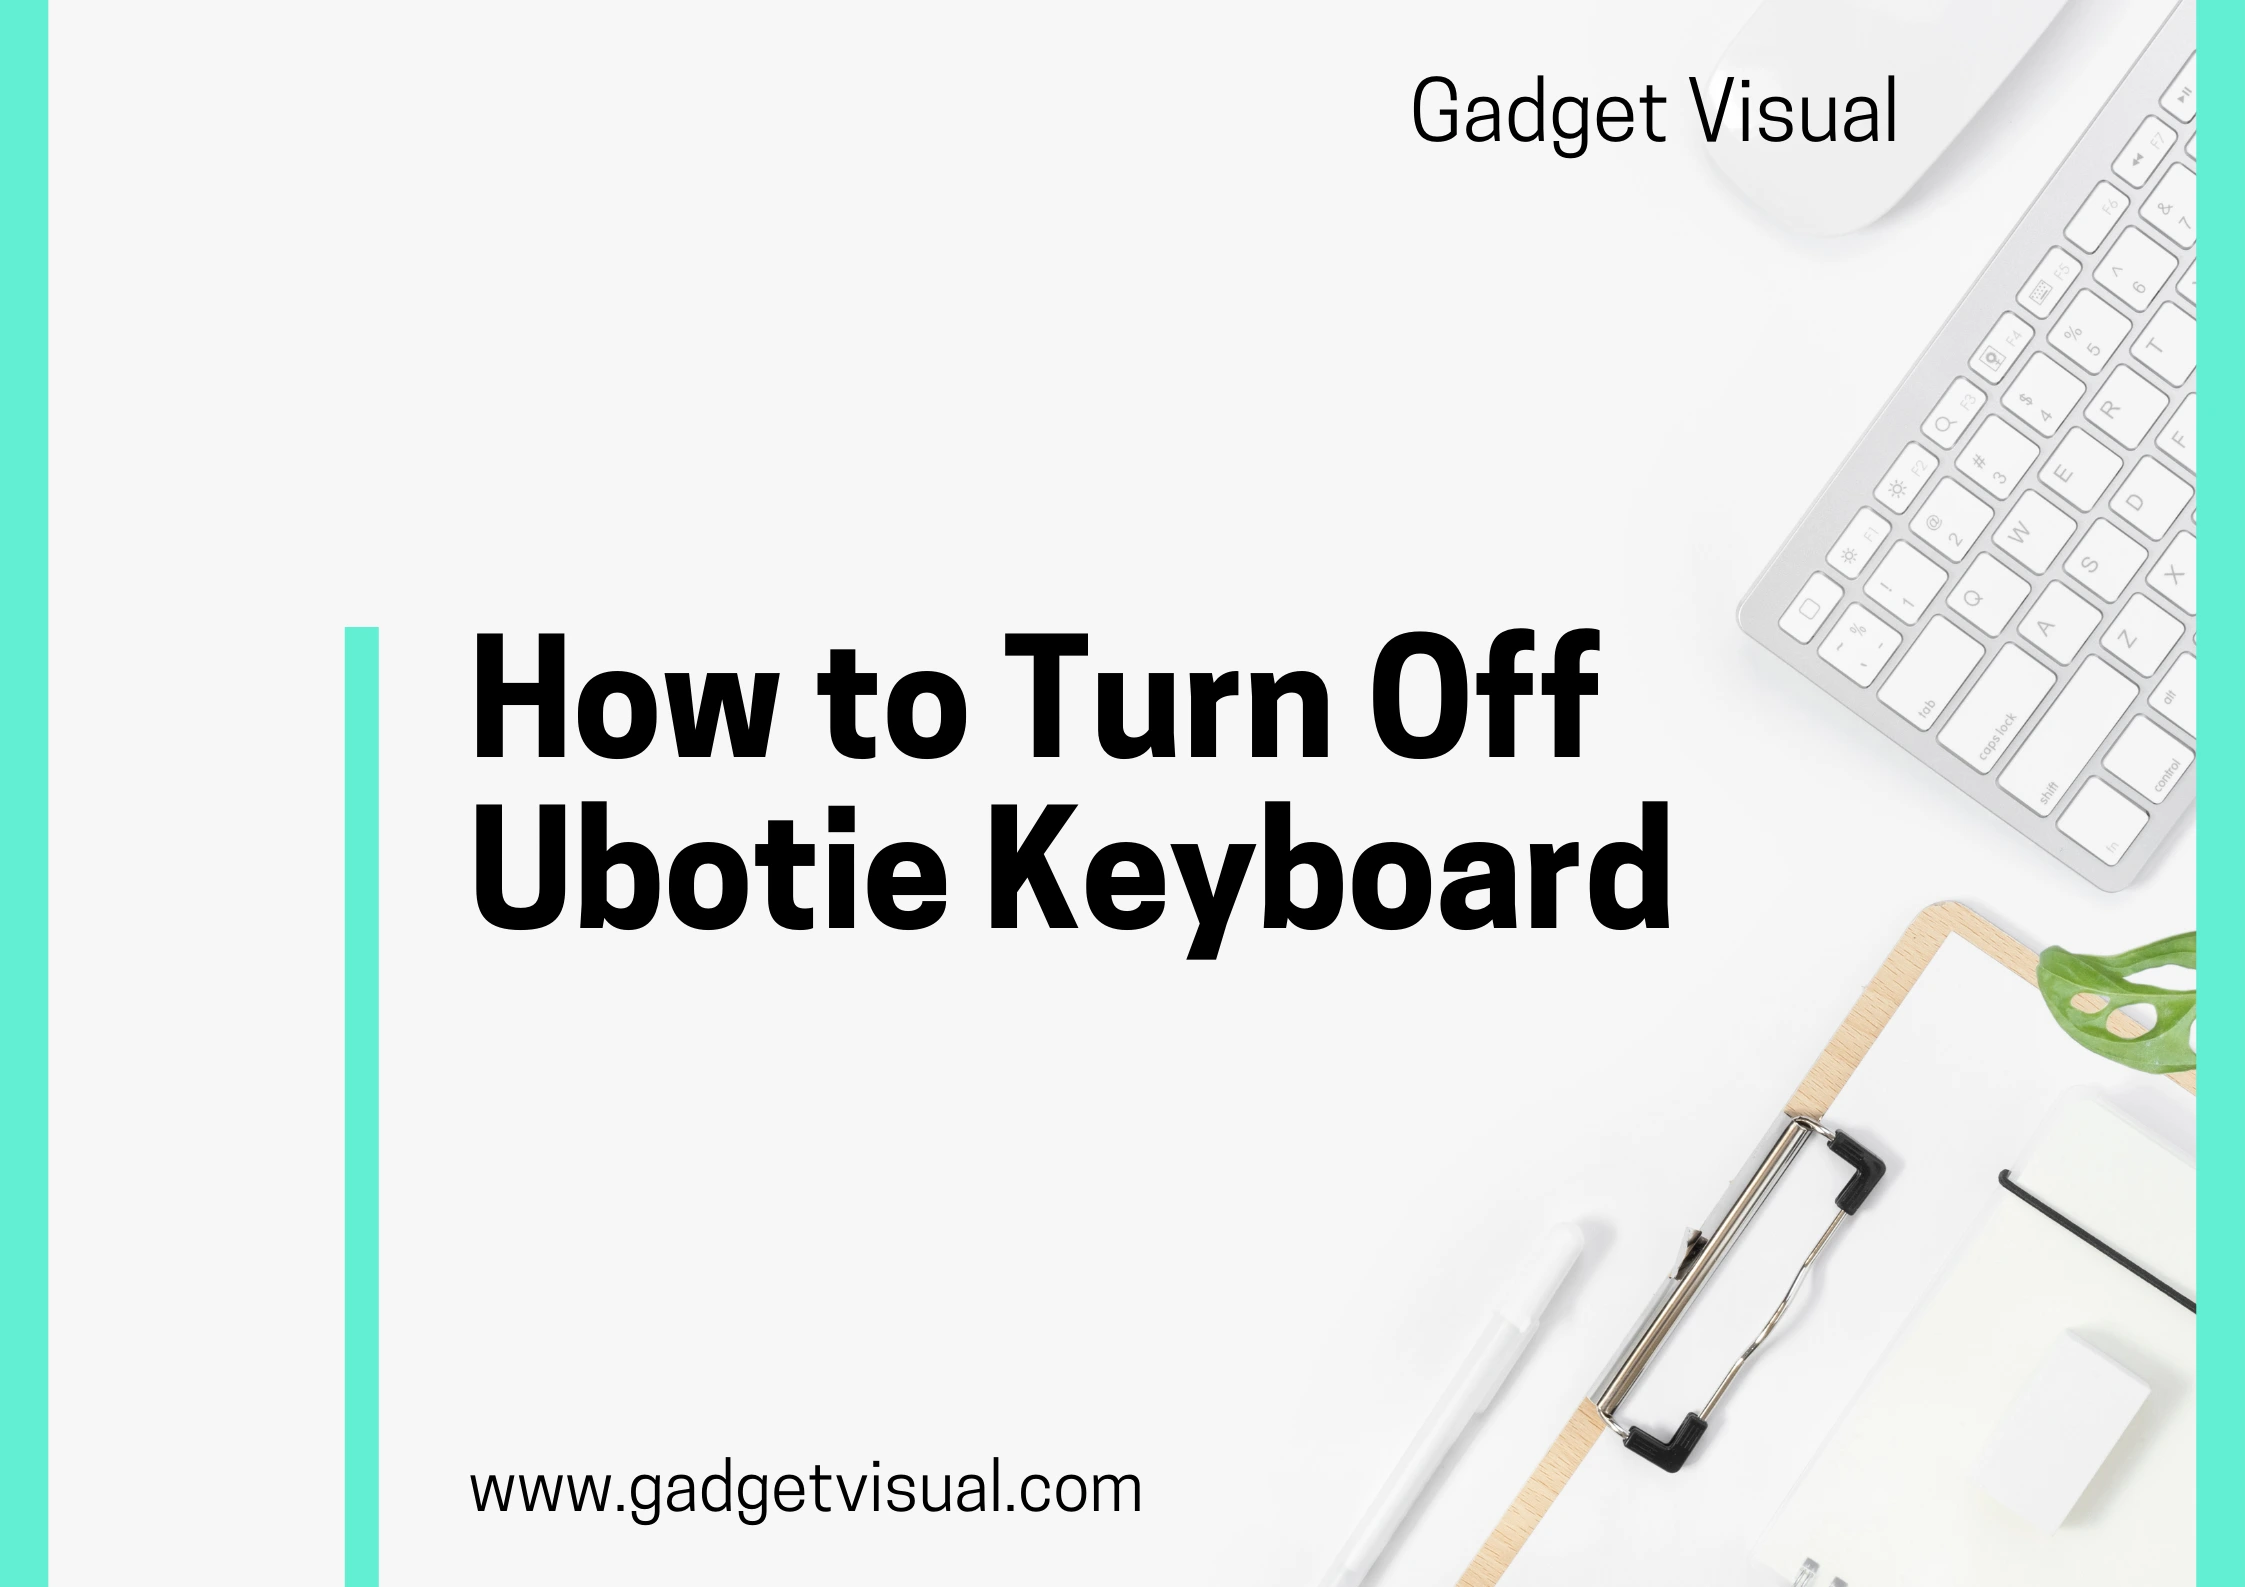 How to Turn Off Ubotie Keyboard